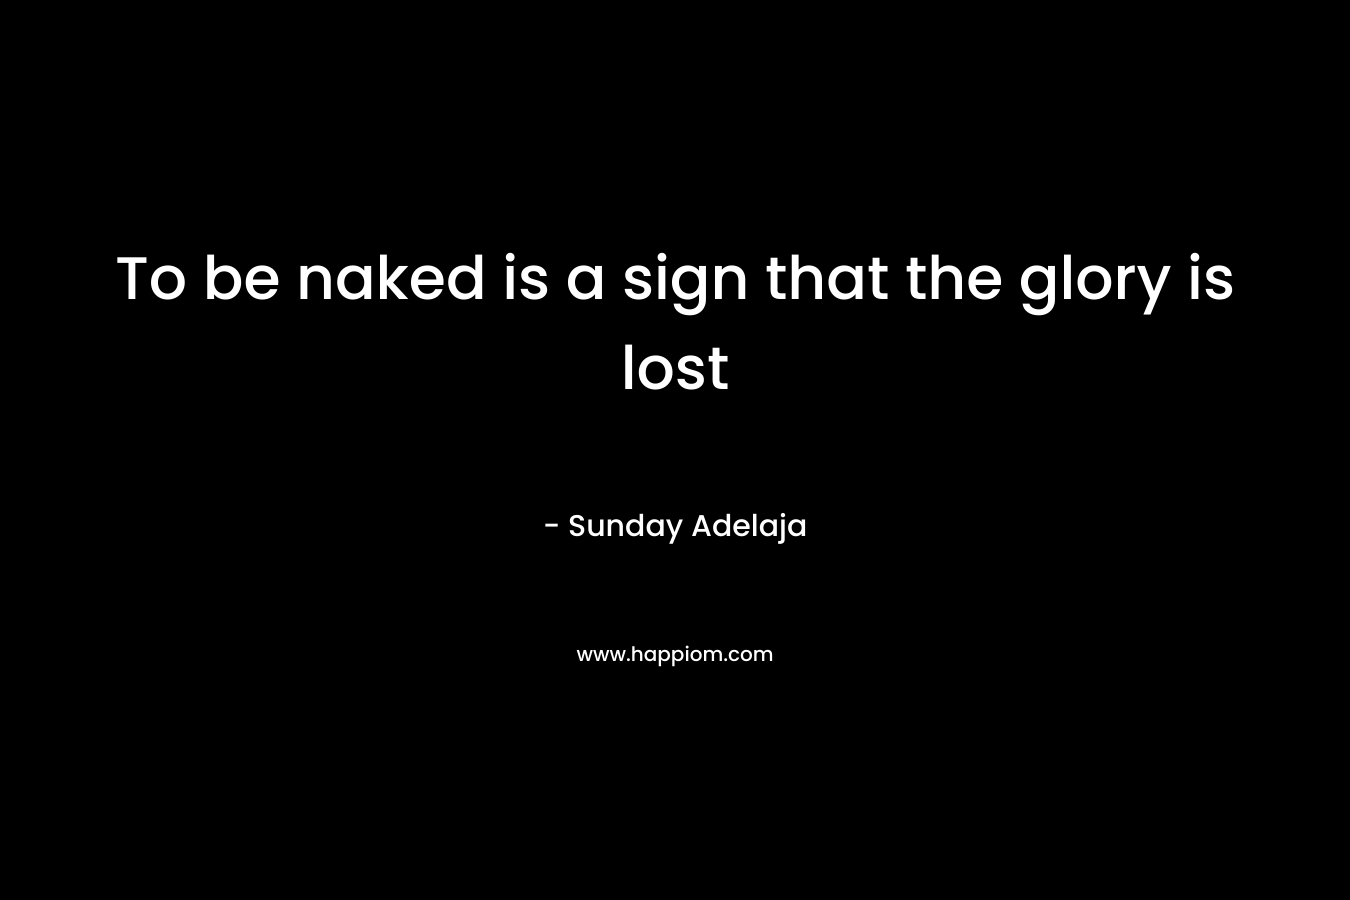 To be naked is a sign that the glory is lost